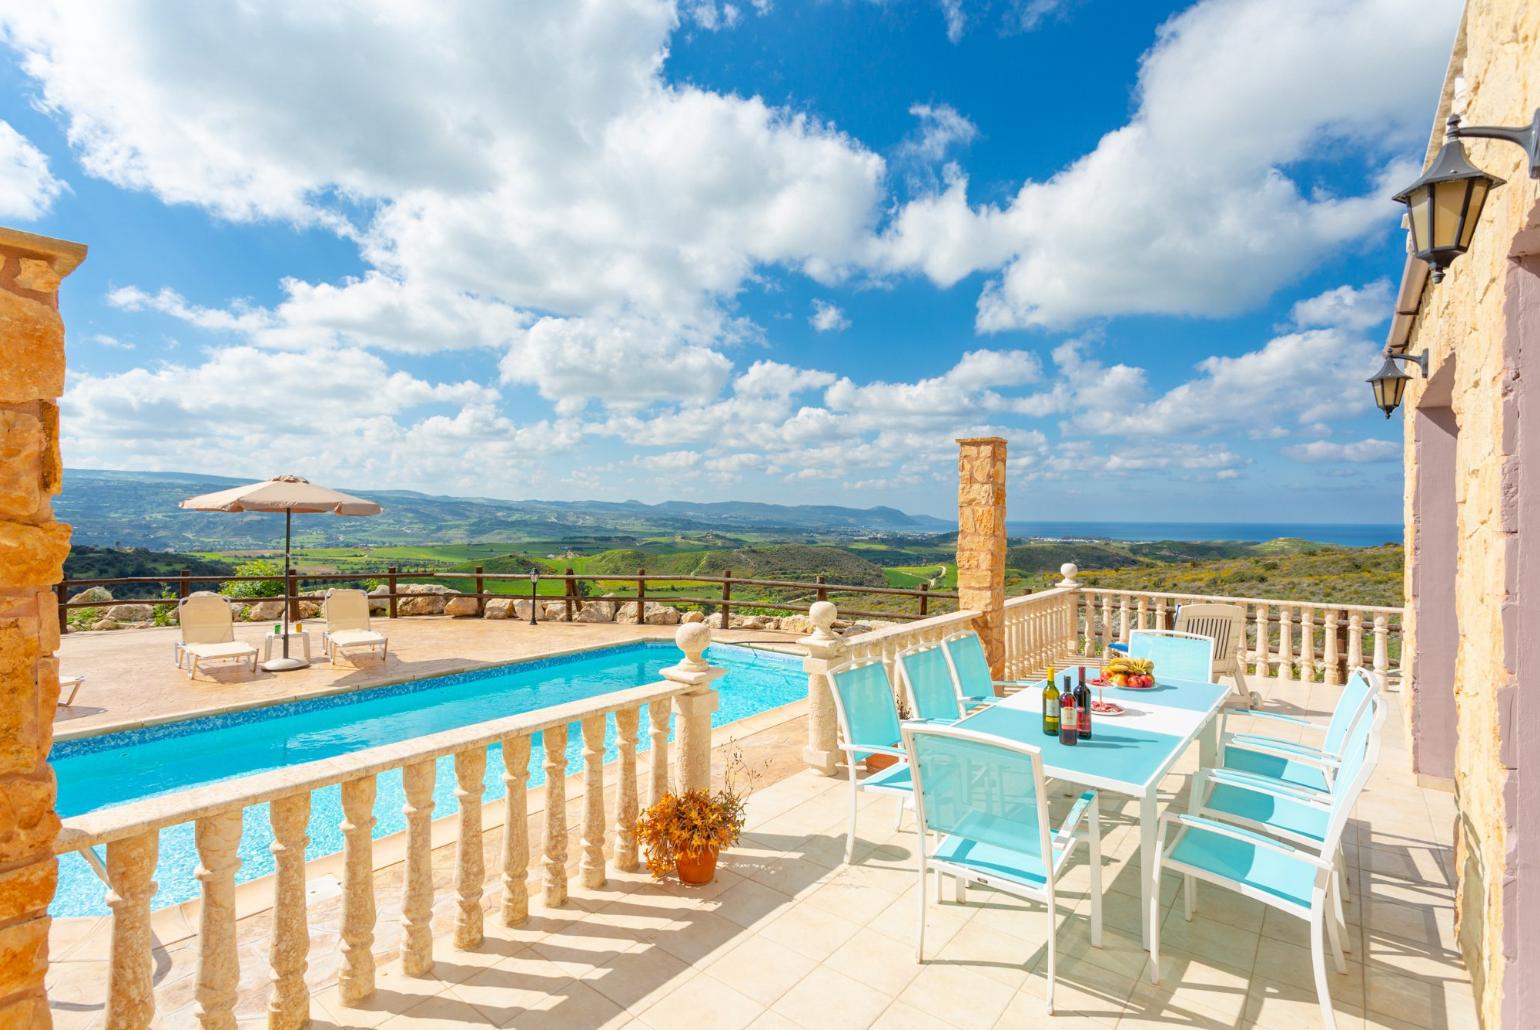 Private pool and terrace area with panoramic views of the sea and countryside